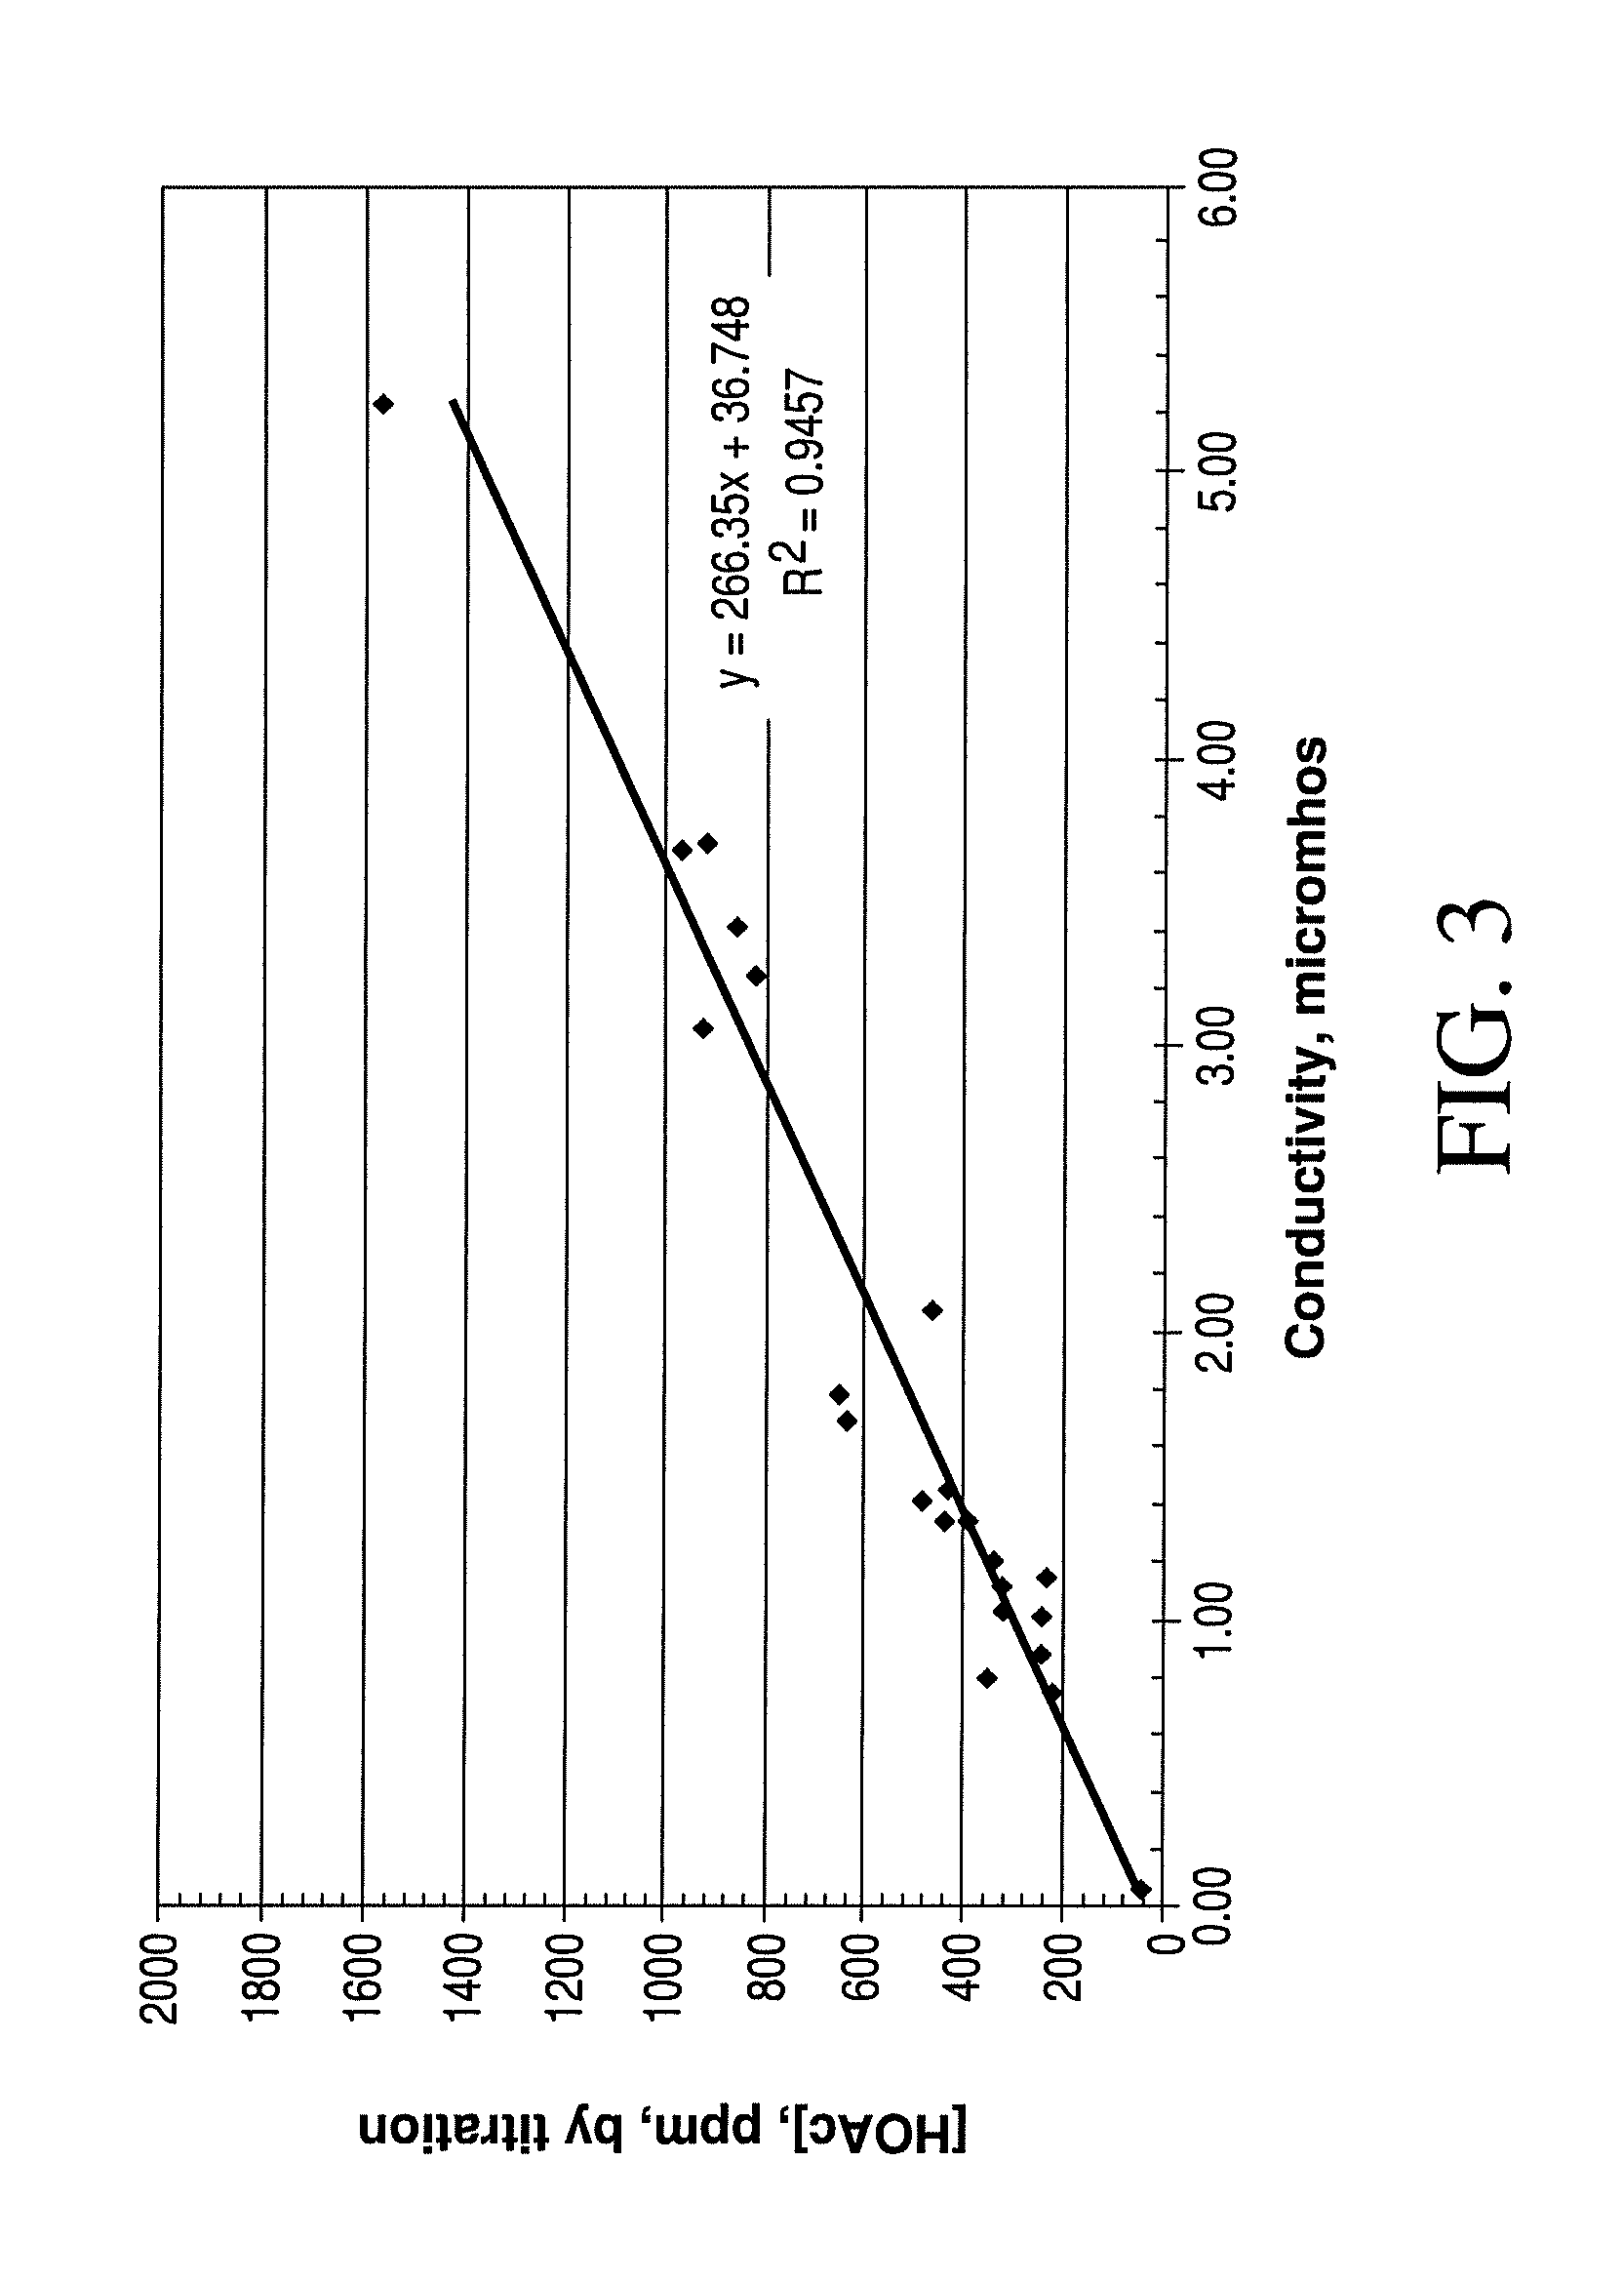 Process for Monitoring Separation of Ethanol Mixture